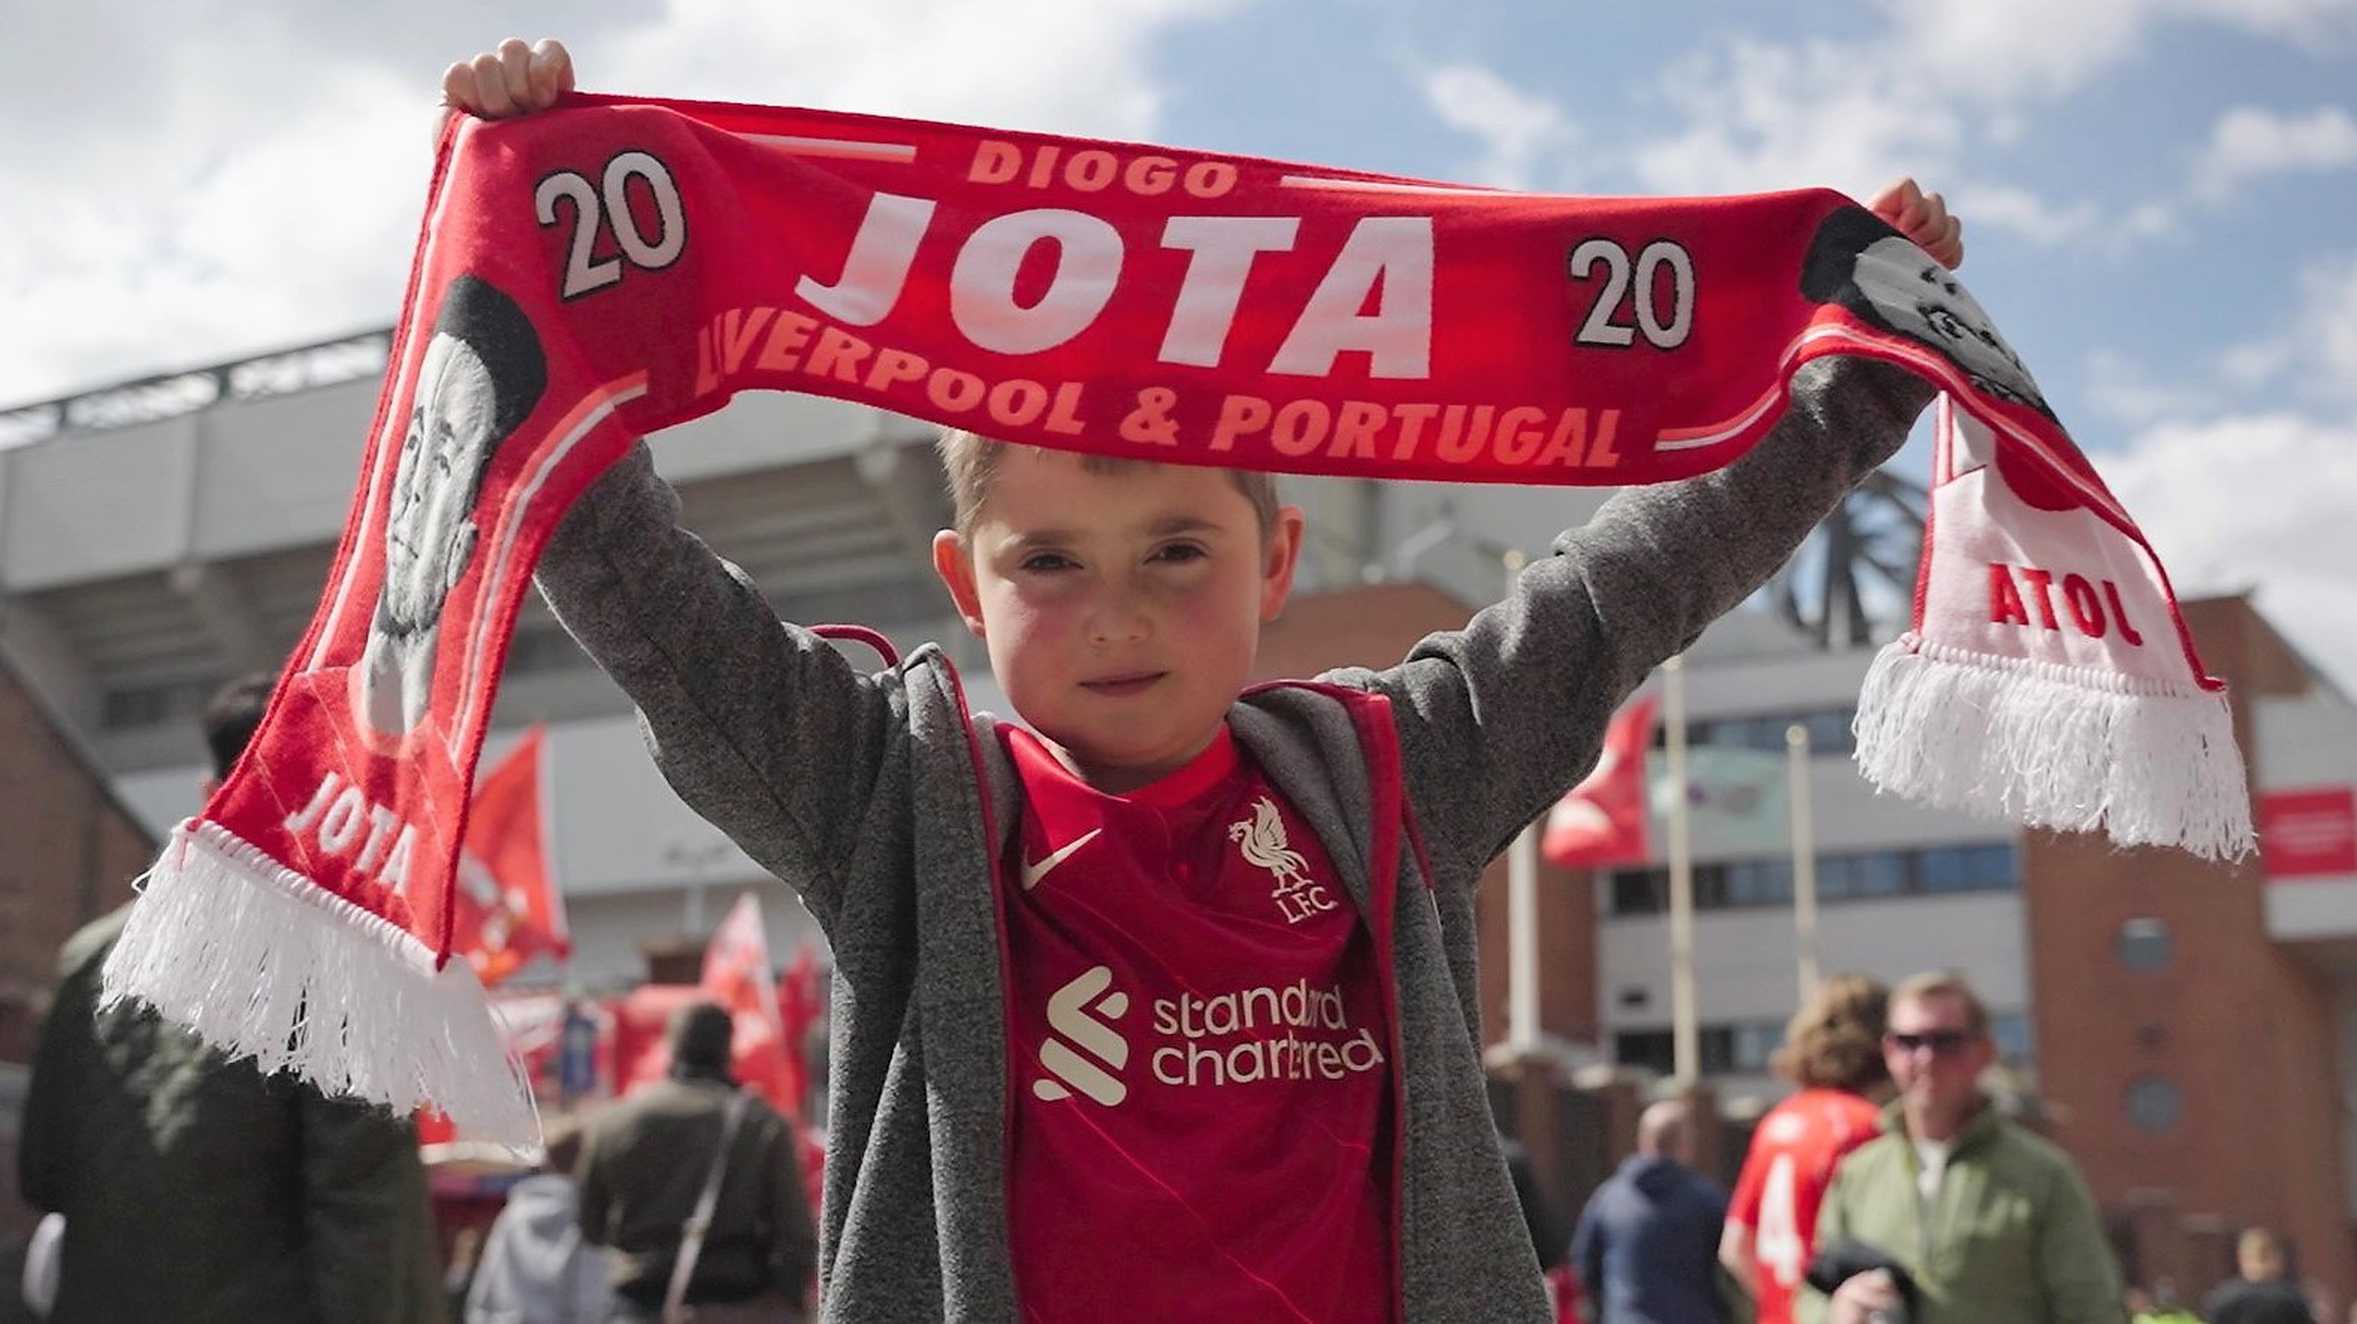 Archie holding up a Liverpool FC scarf outside Anfield Stadium.